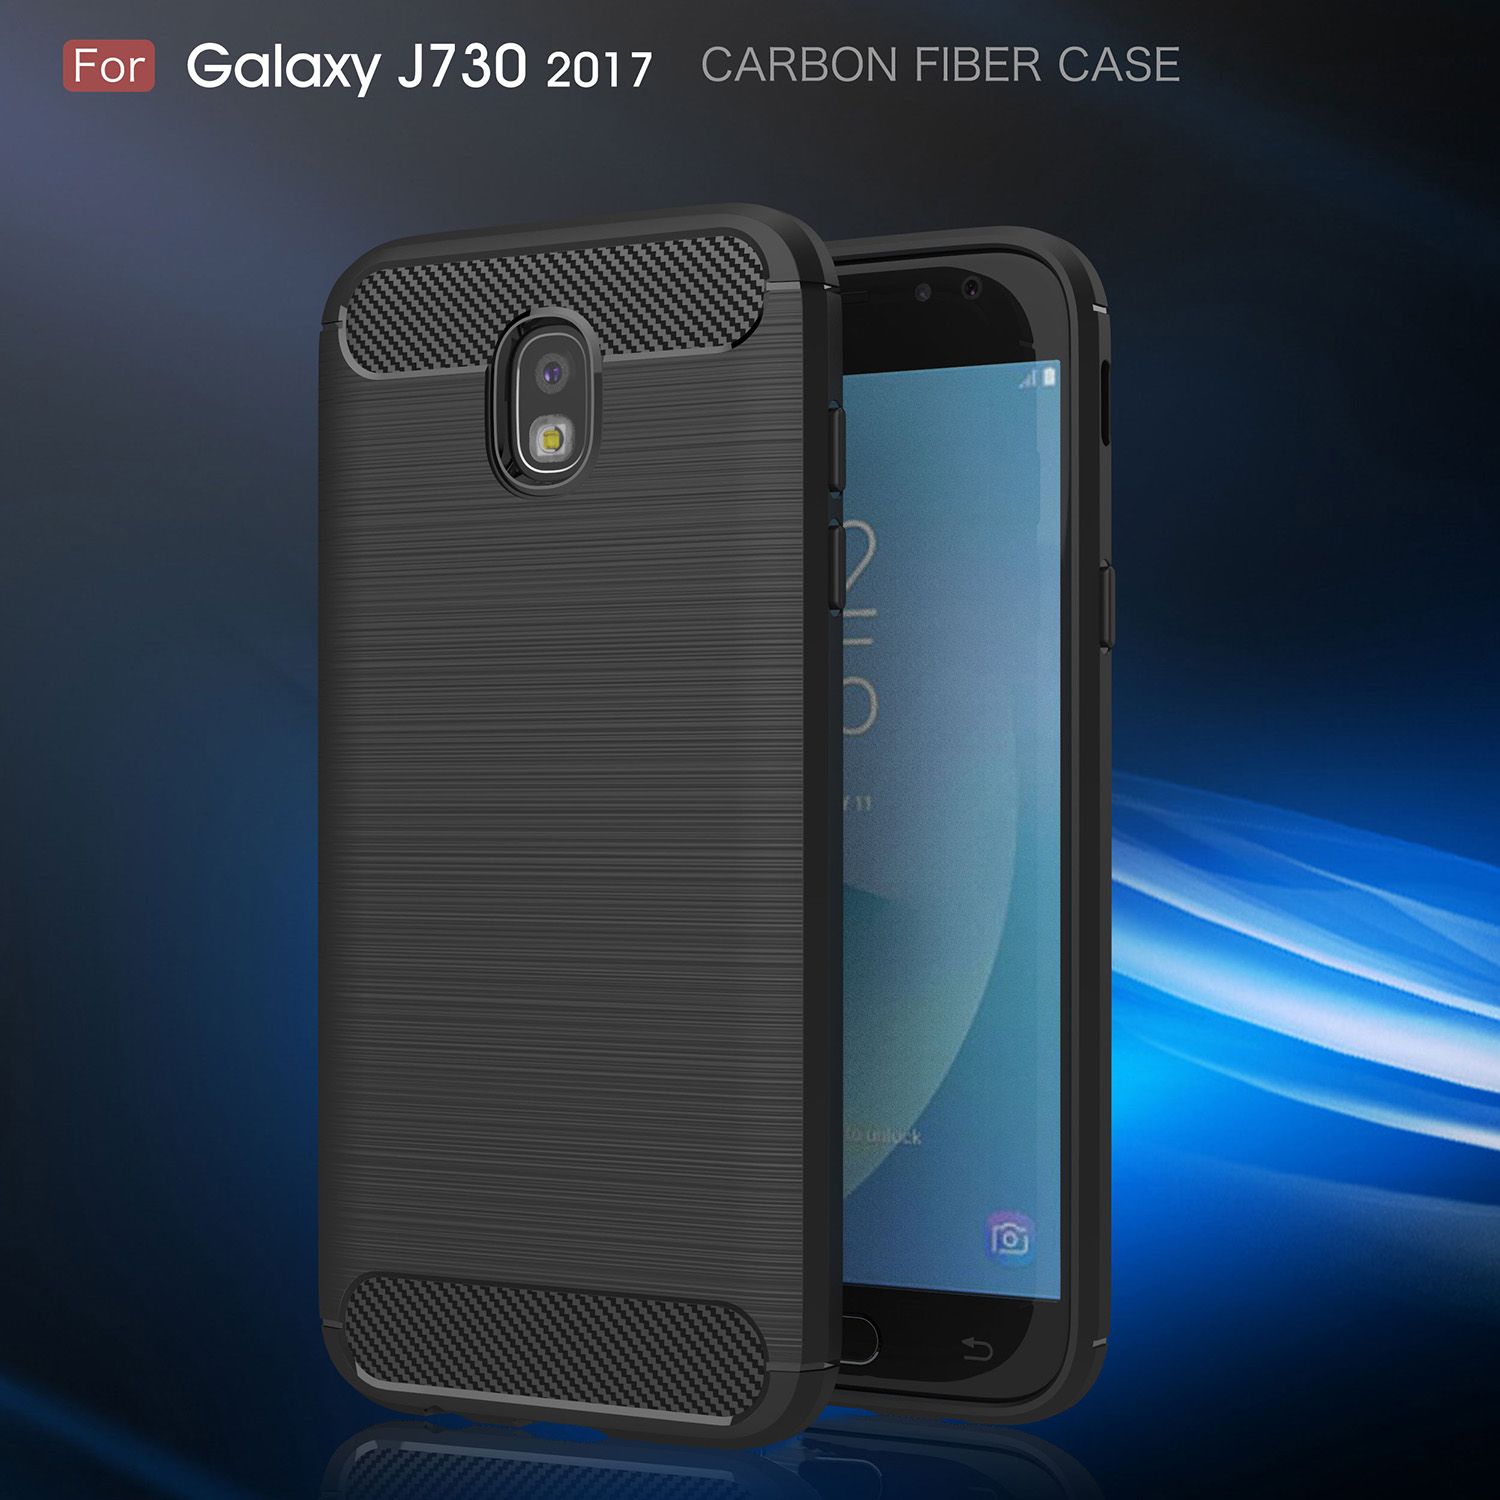 Carbon Fiber Case For Samsung Galaxy J7 Pro J5 J3 17 J330 J530 J730 Eu Brushed Silicone Soft Rubber Back Cover Slim Armor Rugged Skin Rhinestone Cell Phone Cases Silicone Cell Phone